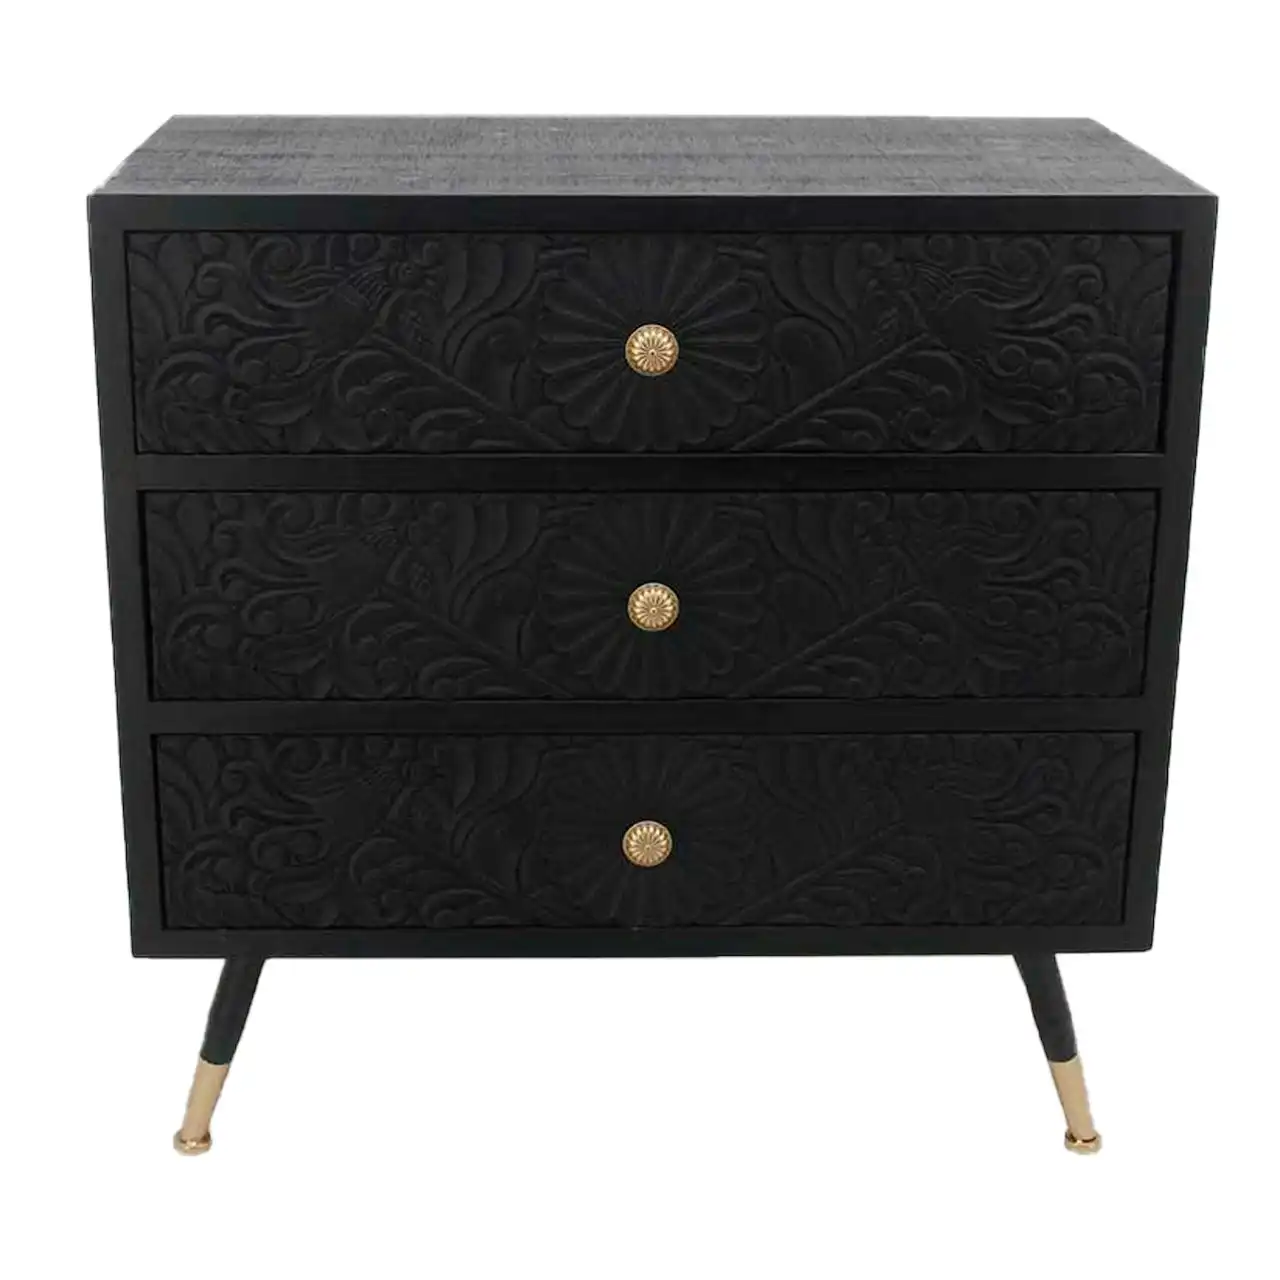 Zohi Interiors Midnight Carved Wood Small Chest of Drawers